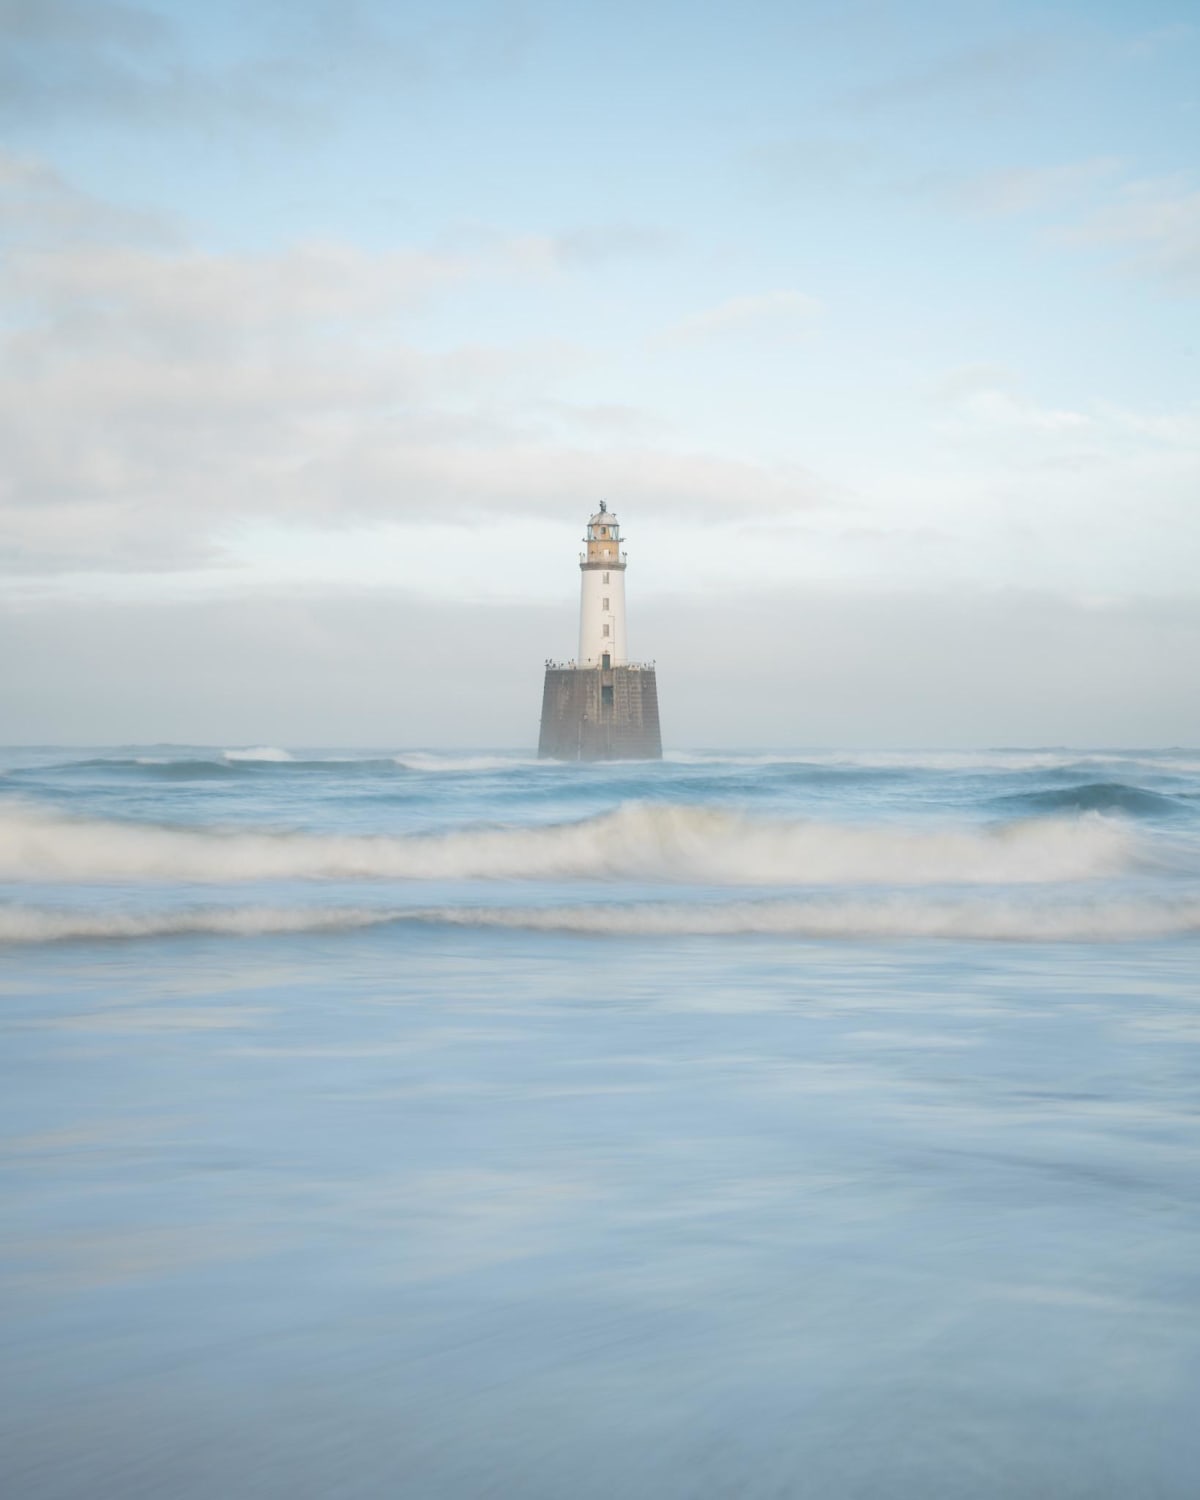 Rattray Head lighthouse in the North East of Scotland.